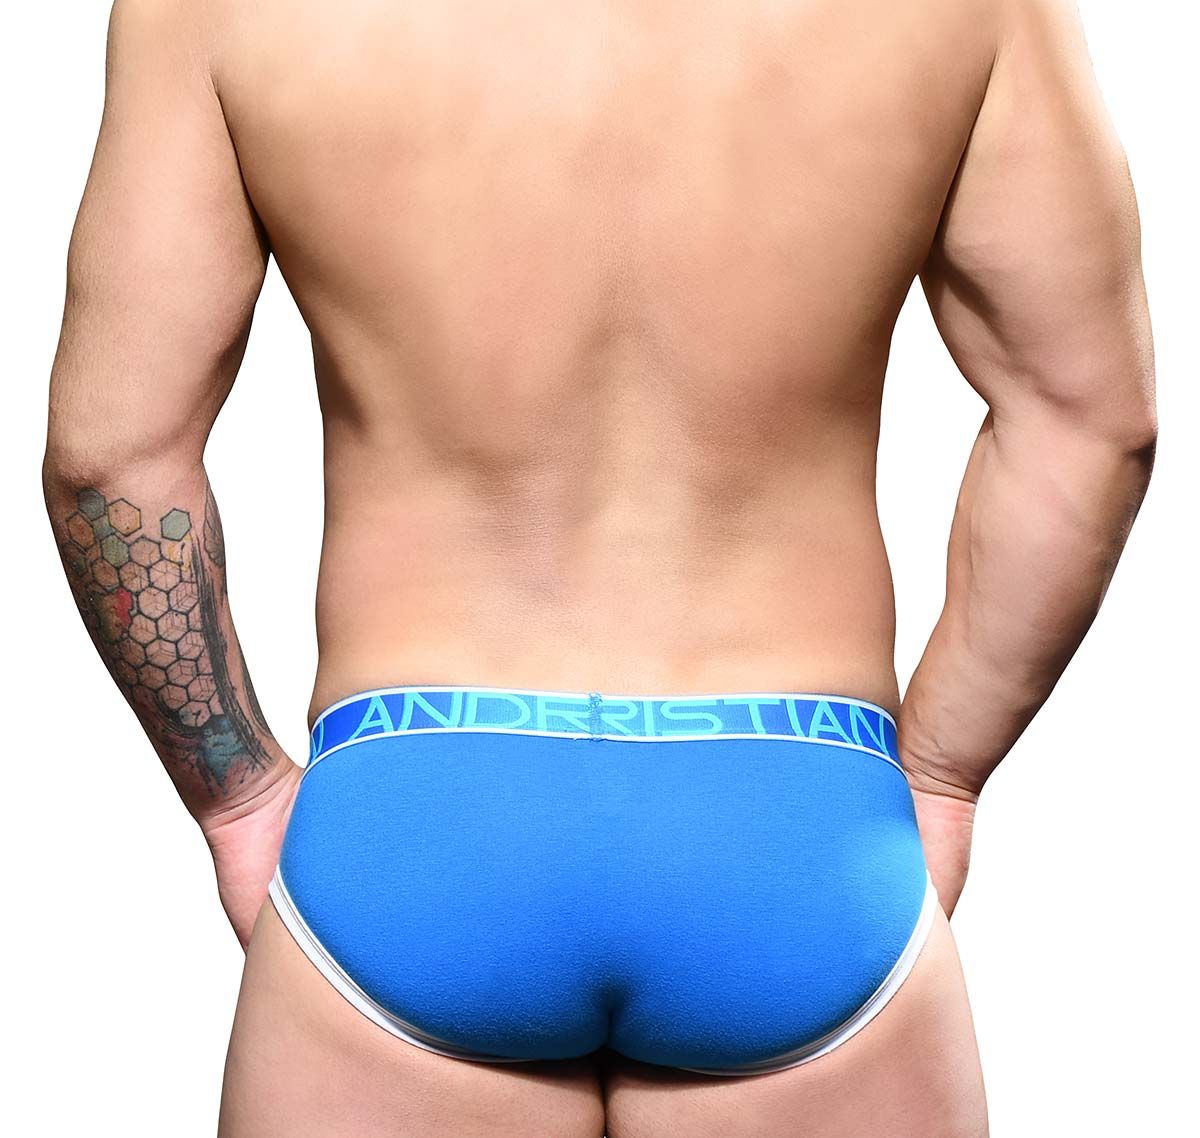 Andrew Christian Slip FLY TAGLESS BRIEF w/ ALMOST NAKED 92187, azul